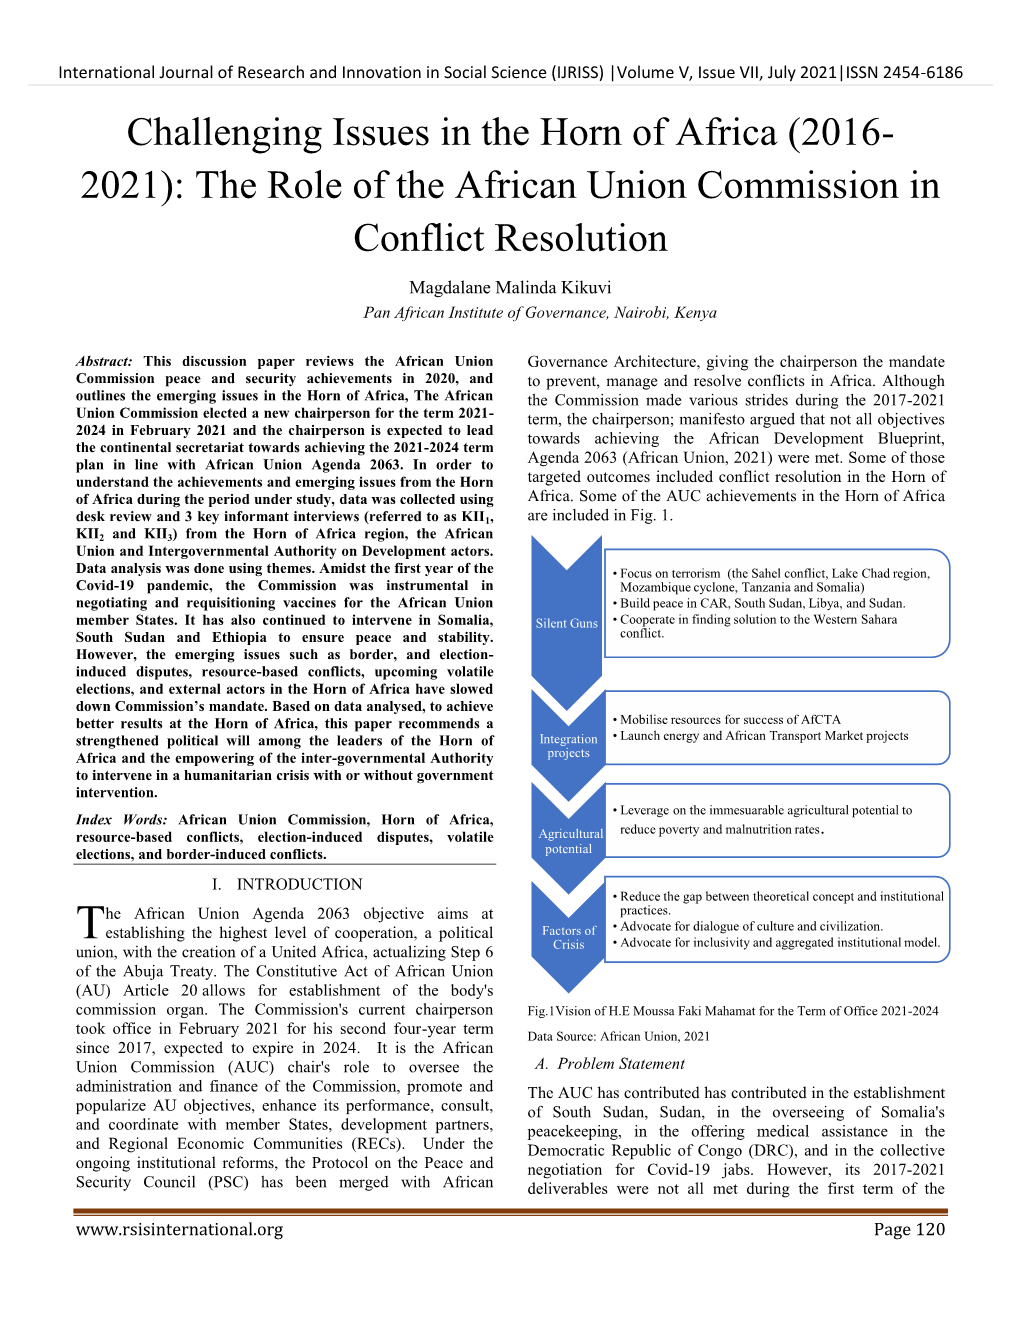 Challenging Issues in the Horn of Africa (2016-2021): the Role of The